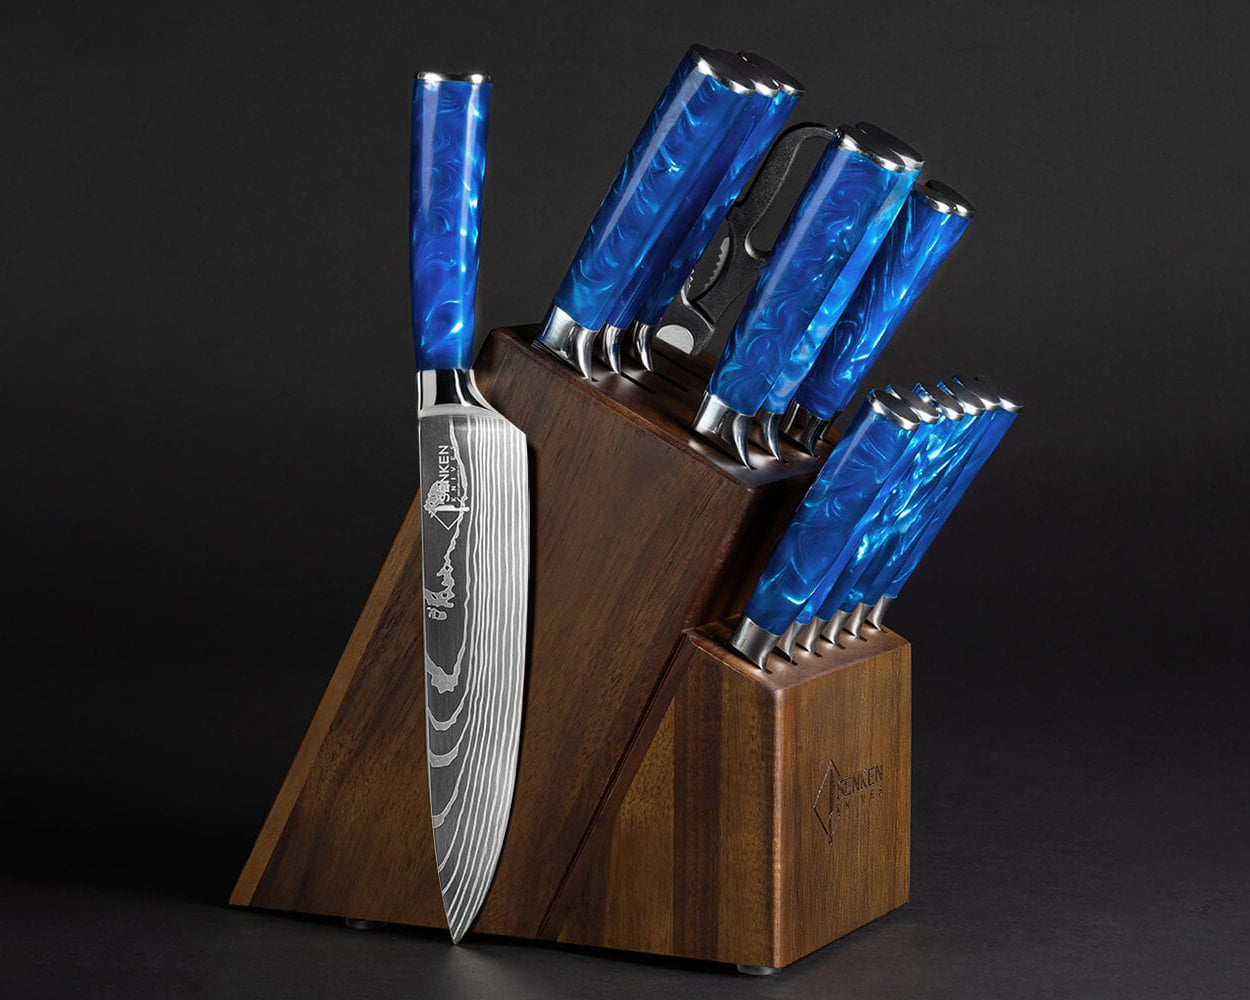 15-Piece Damascus Kitchen Knife Set with Movable Wooden Block